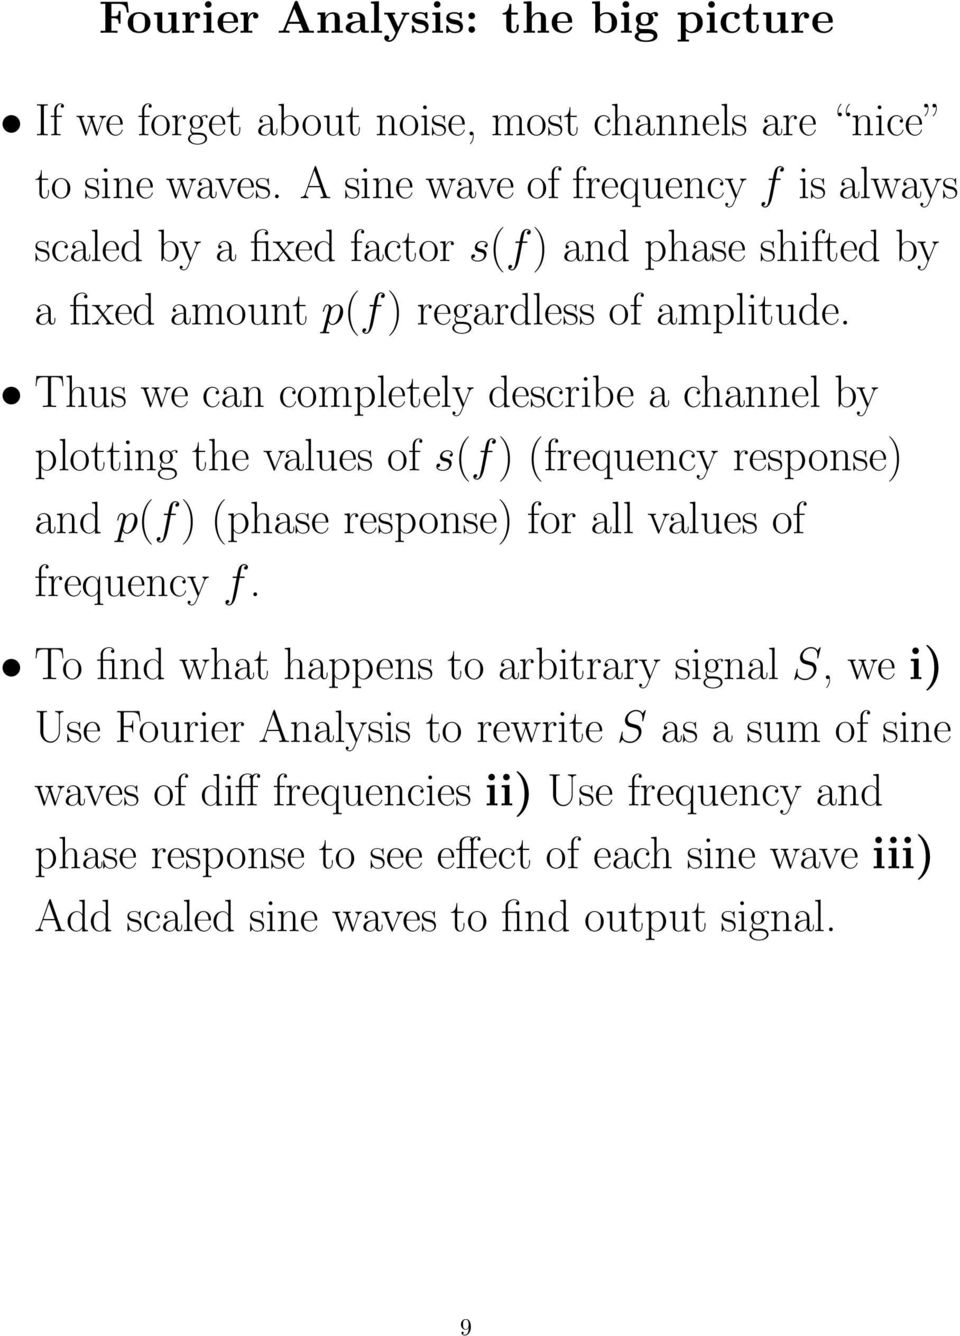 Thus we can completely describe a channel by plotting the values of s(f) (frequency response) and p(f) (phase response) for all values of frequency f.